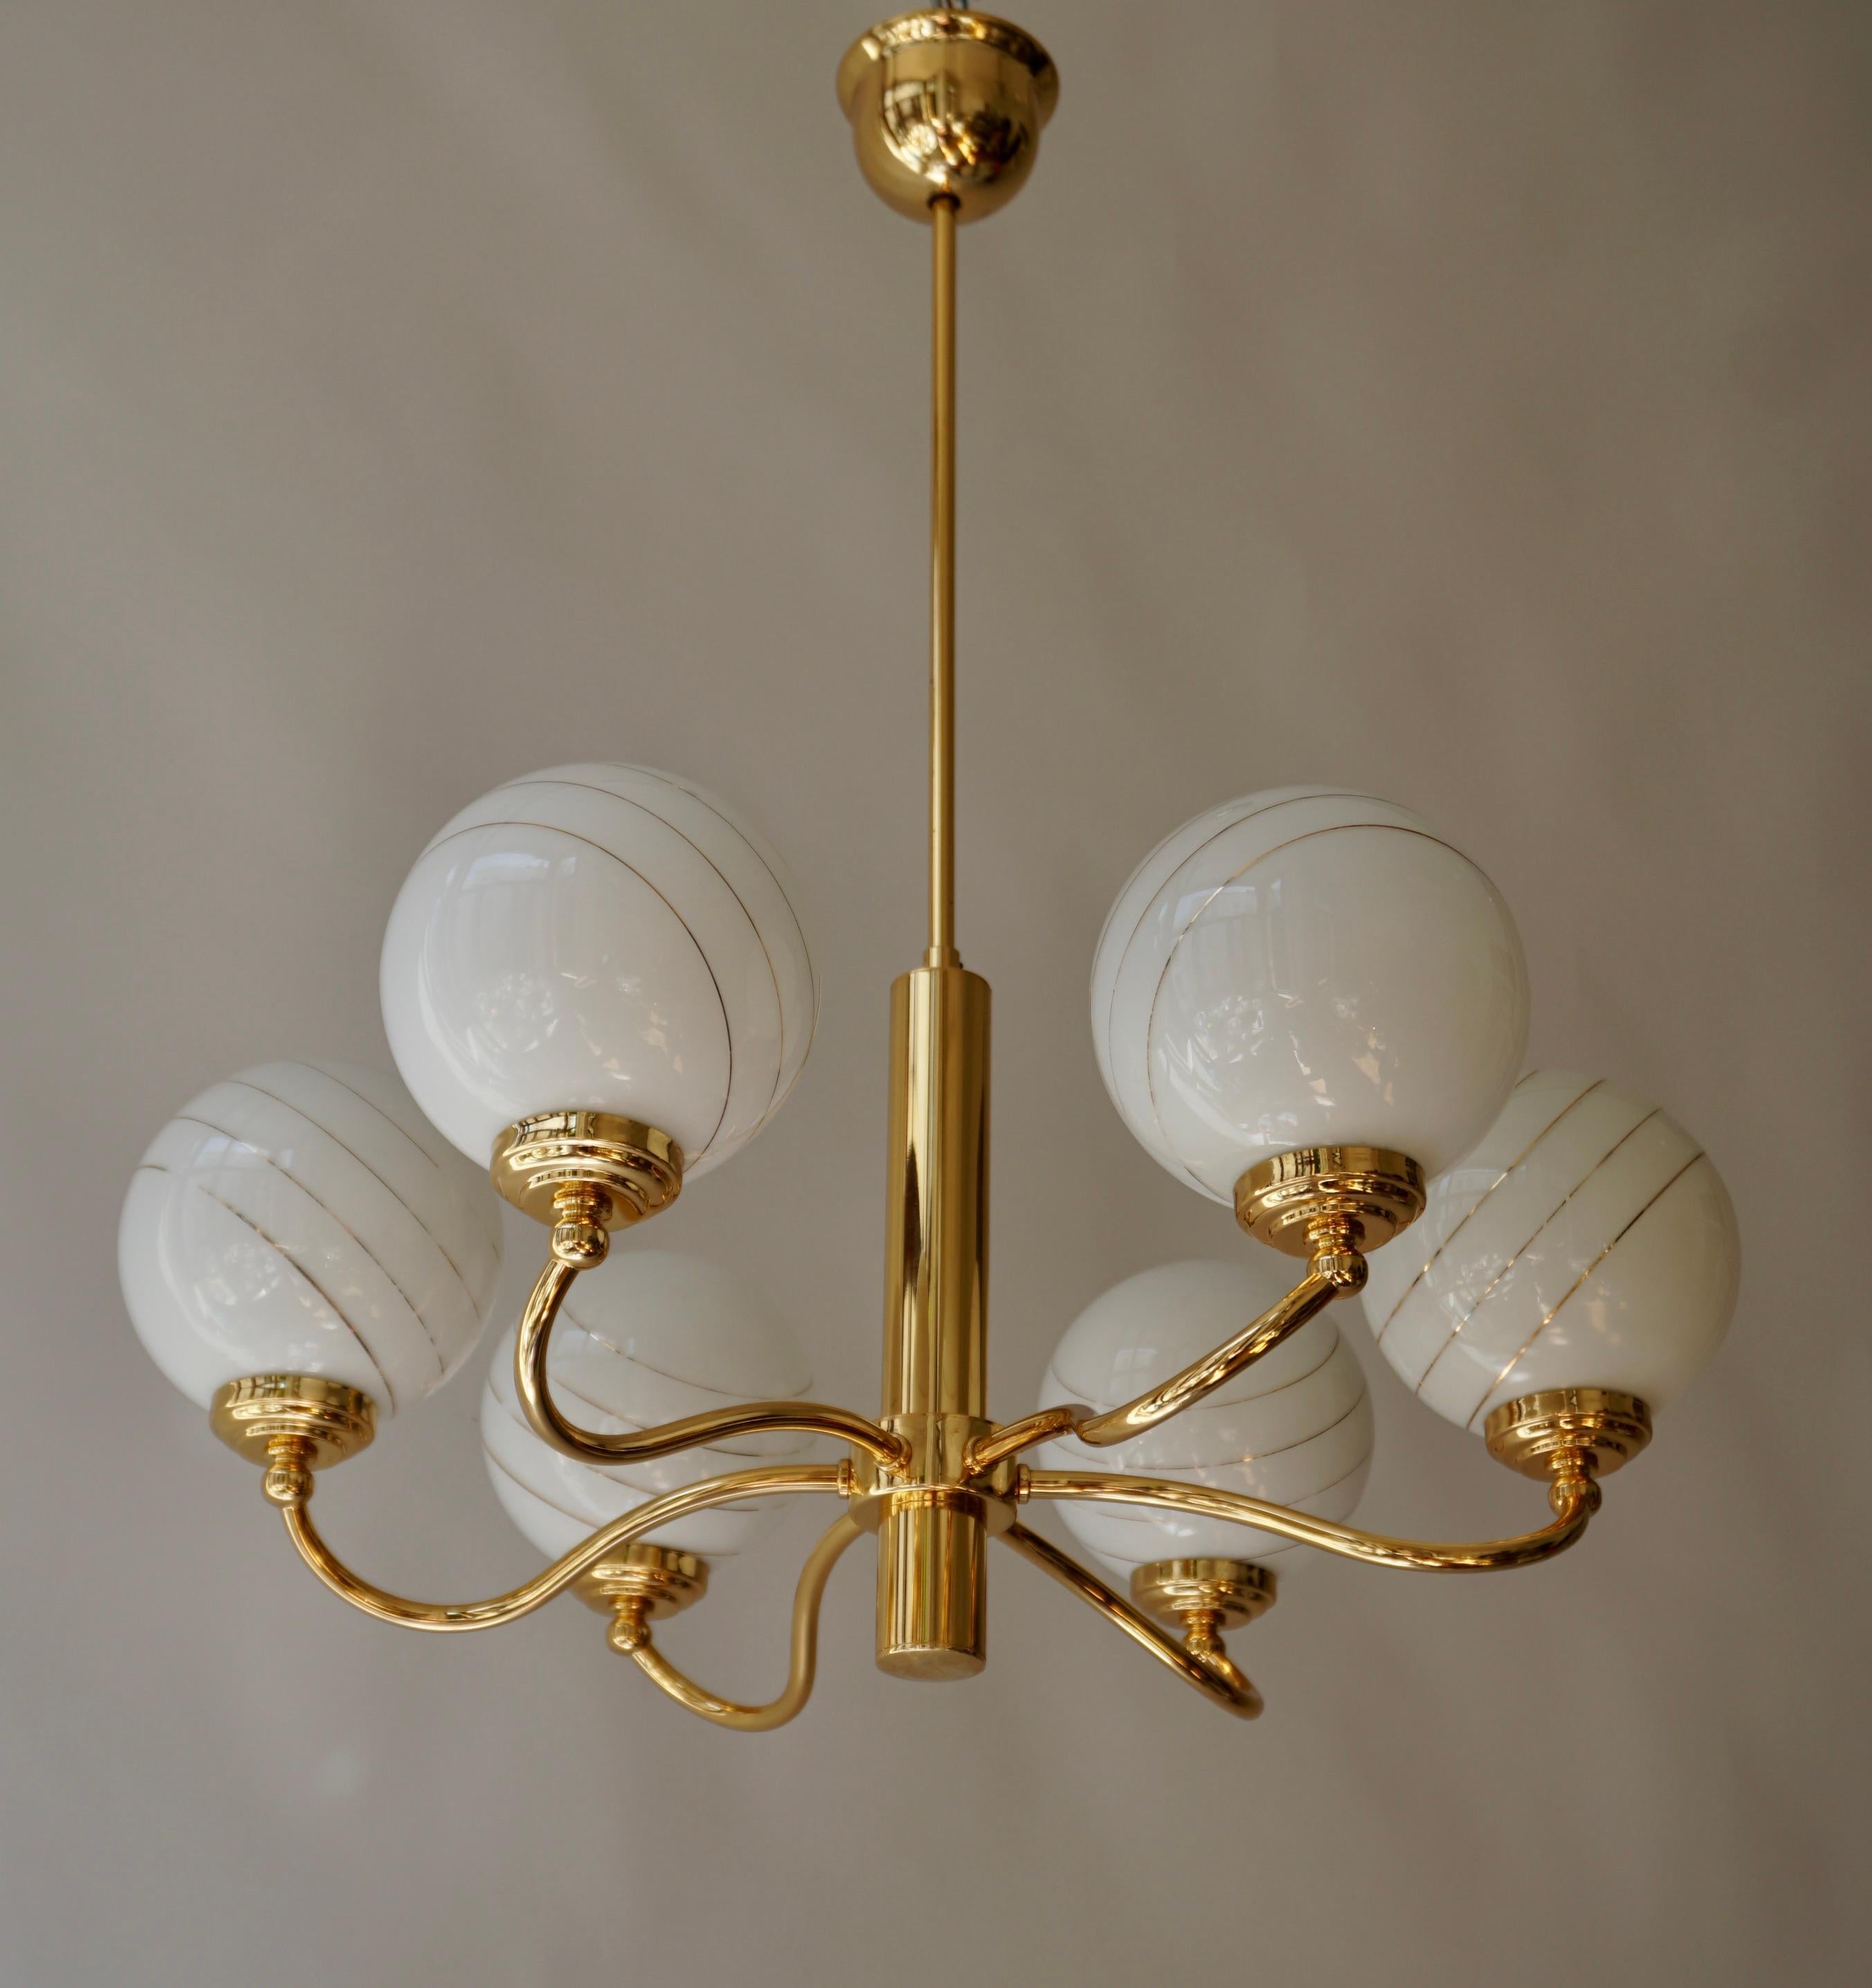 Three Italian Murano glass and brass six-arms chandeliers.  
Balloon brass chandelier with 6 large white glass opaline spheres with gold stripes and brass fixture.

Measures: 
Diameter 23.6